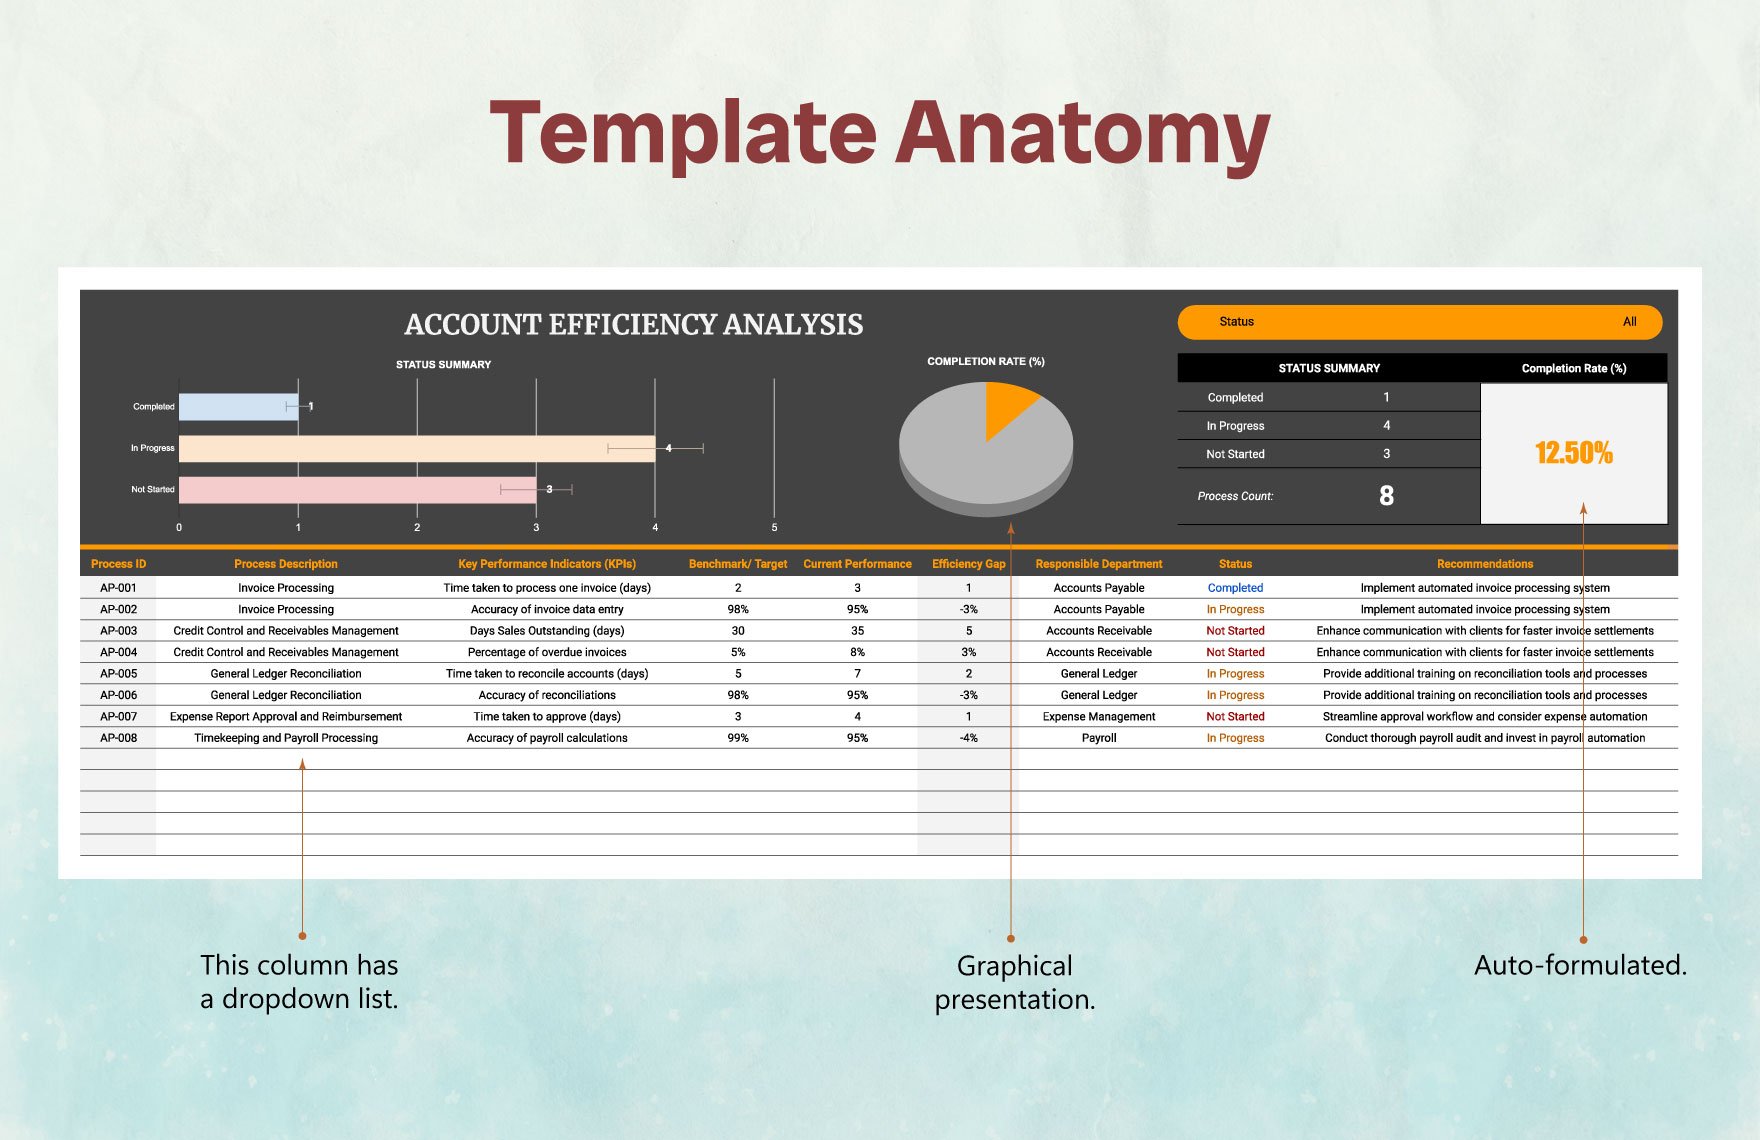 Accounts Efficiency Analysis Template